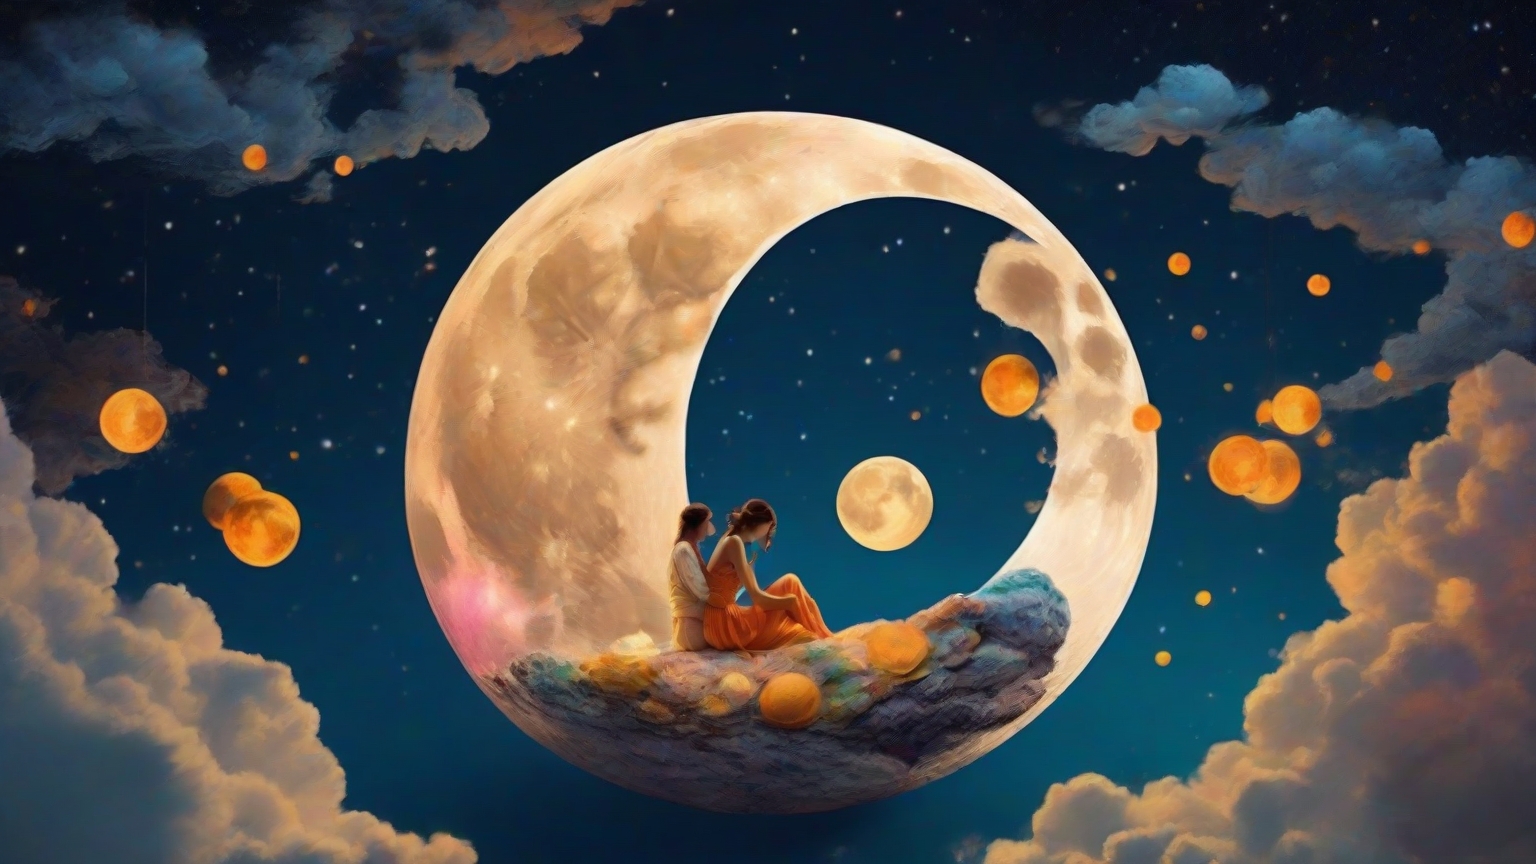 When the Moon Falls Short: Reflections on Creativity in Relationships